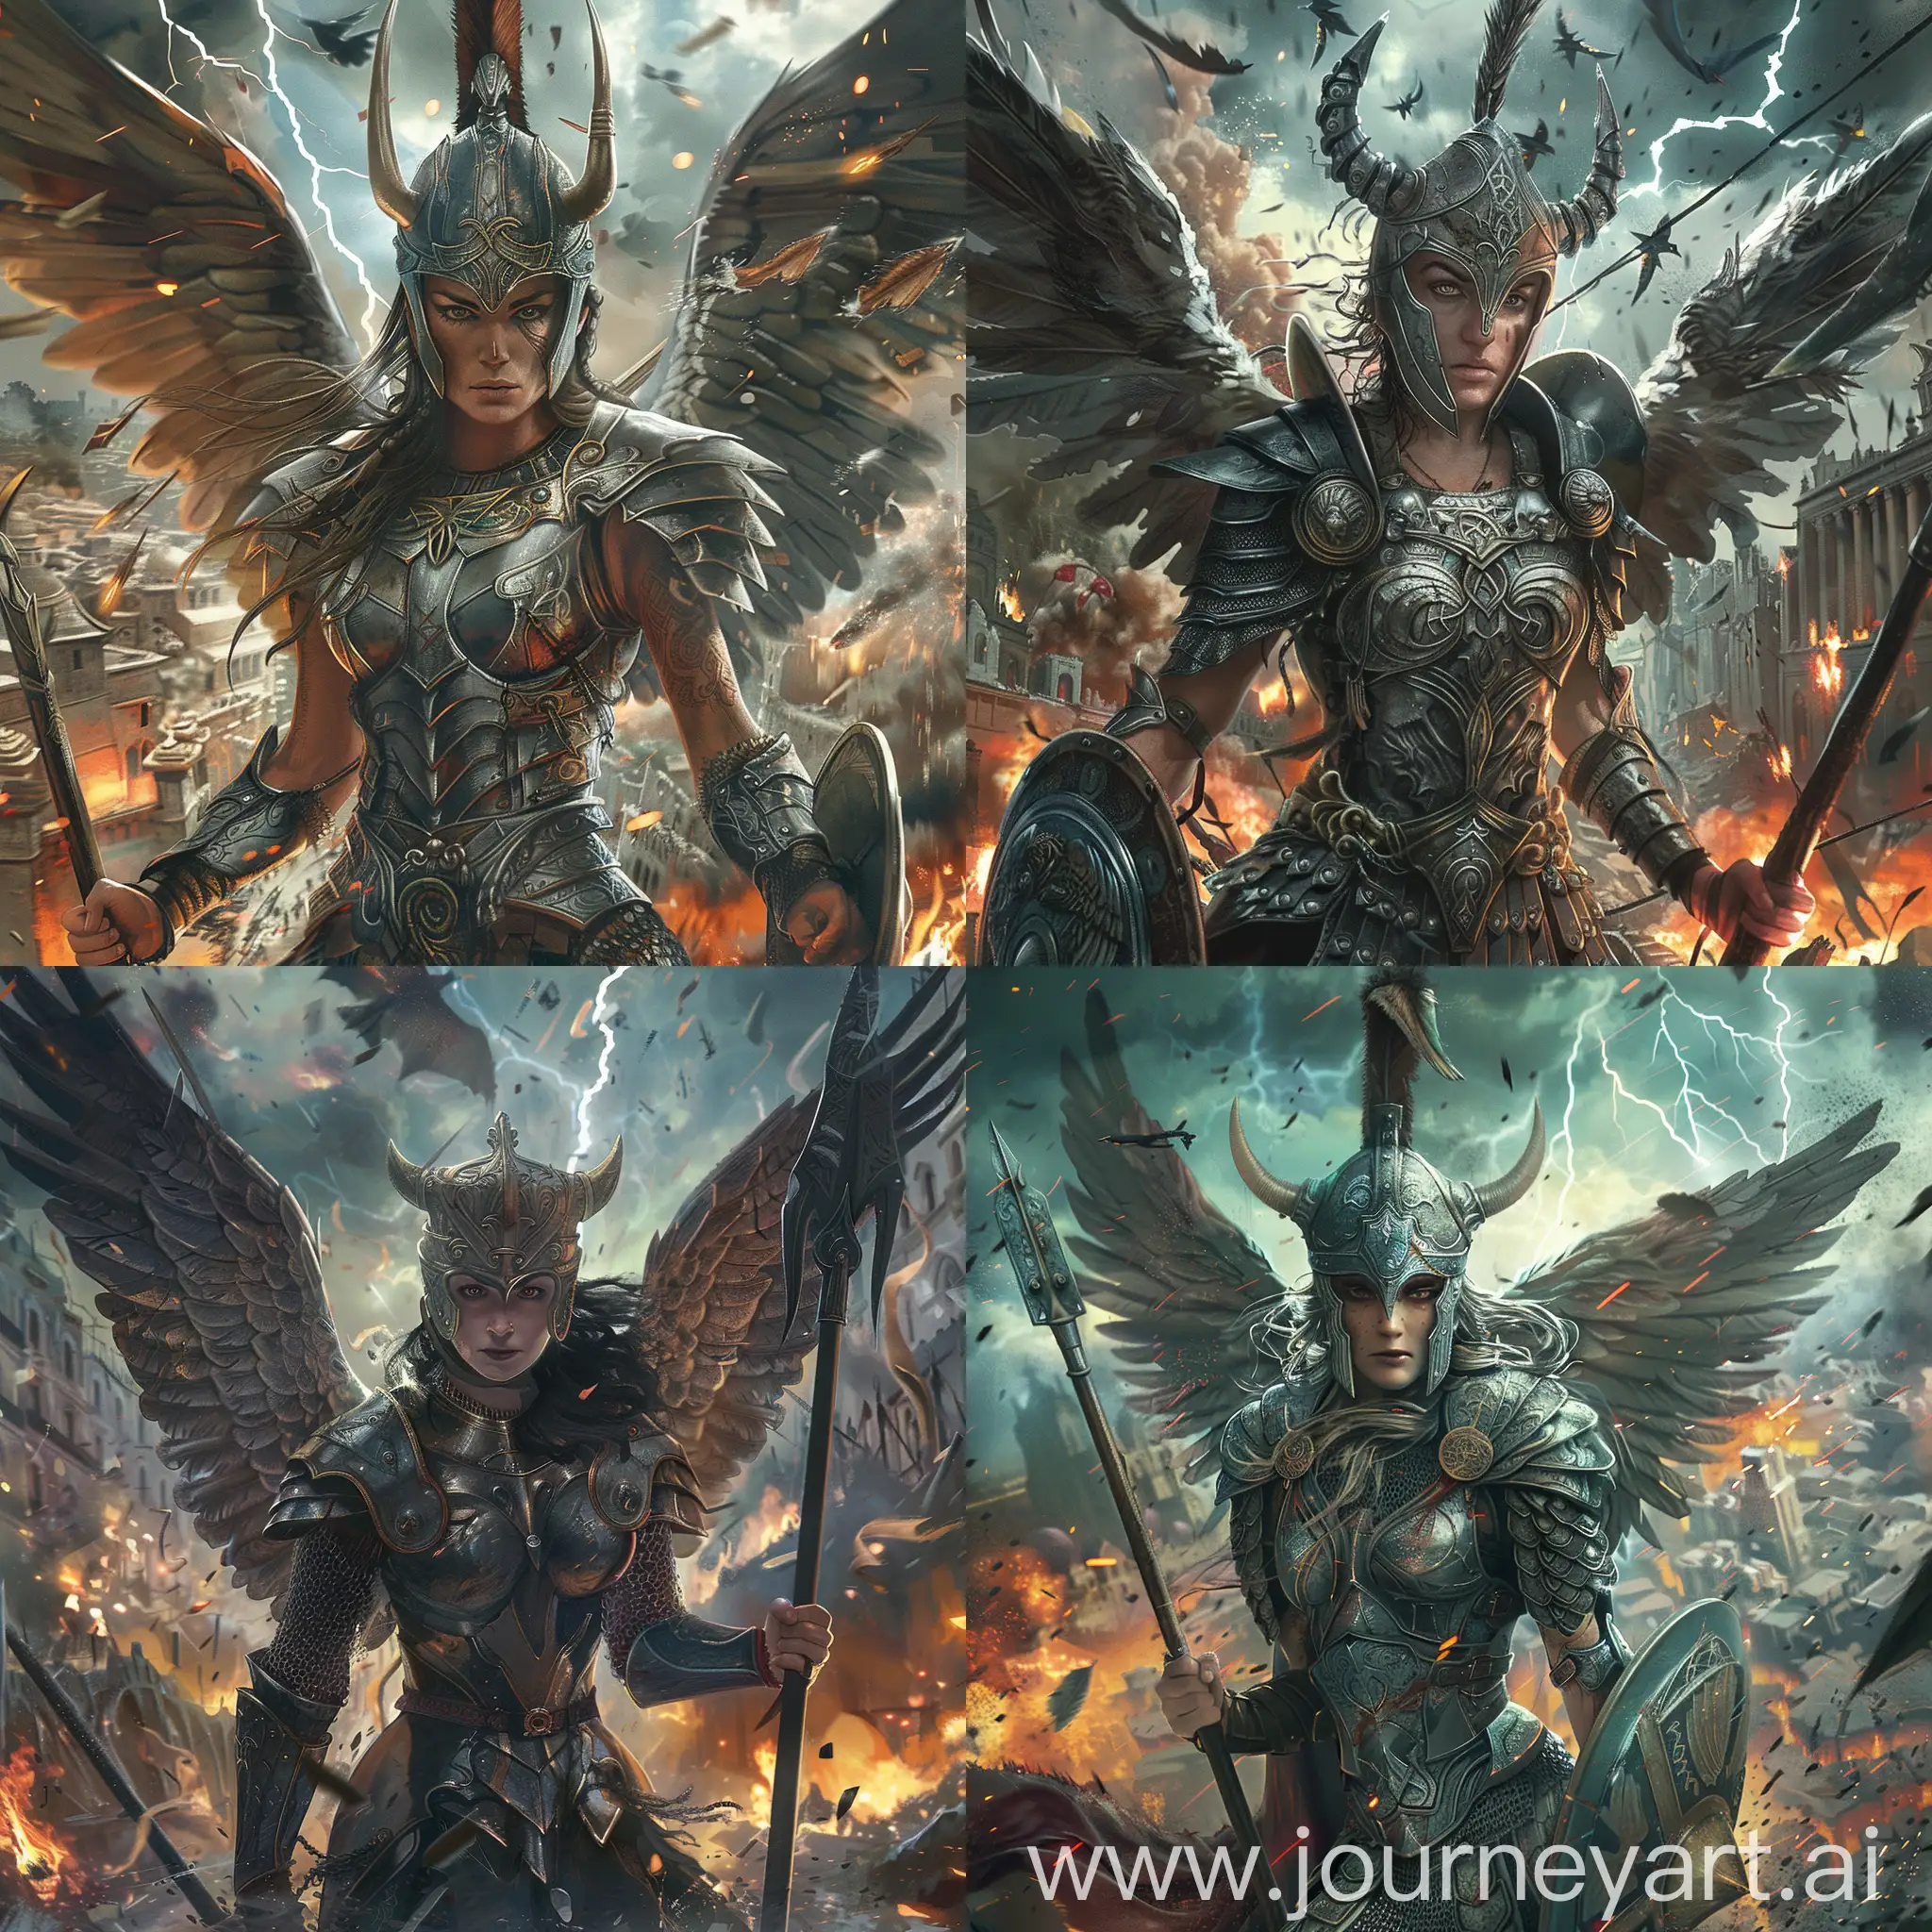 Warrior-Valkyrie-with-Spear-and-Shield-Amidst-City-Chaos